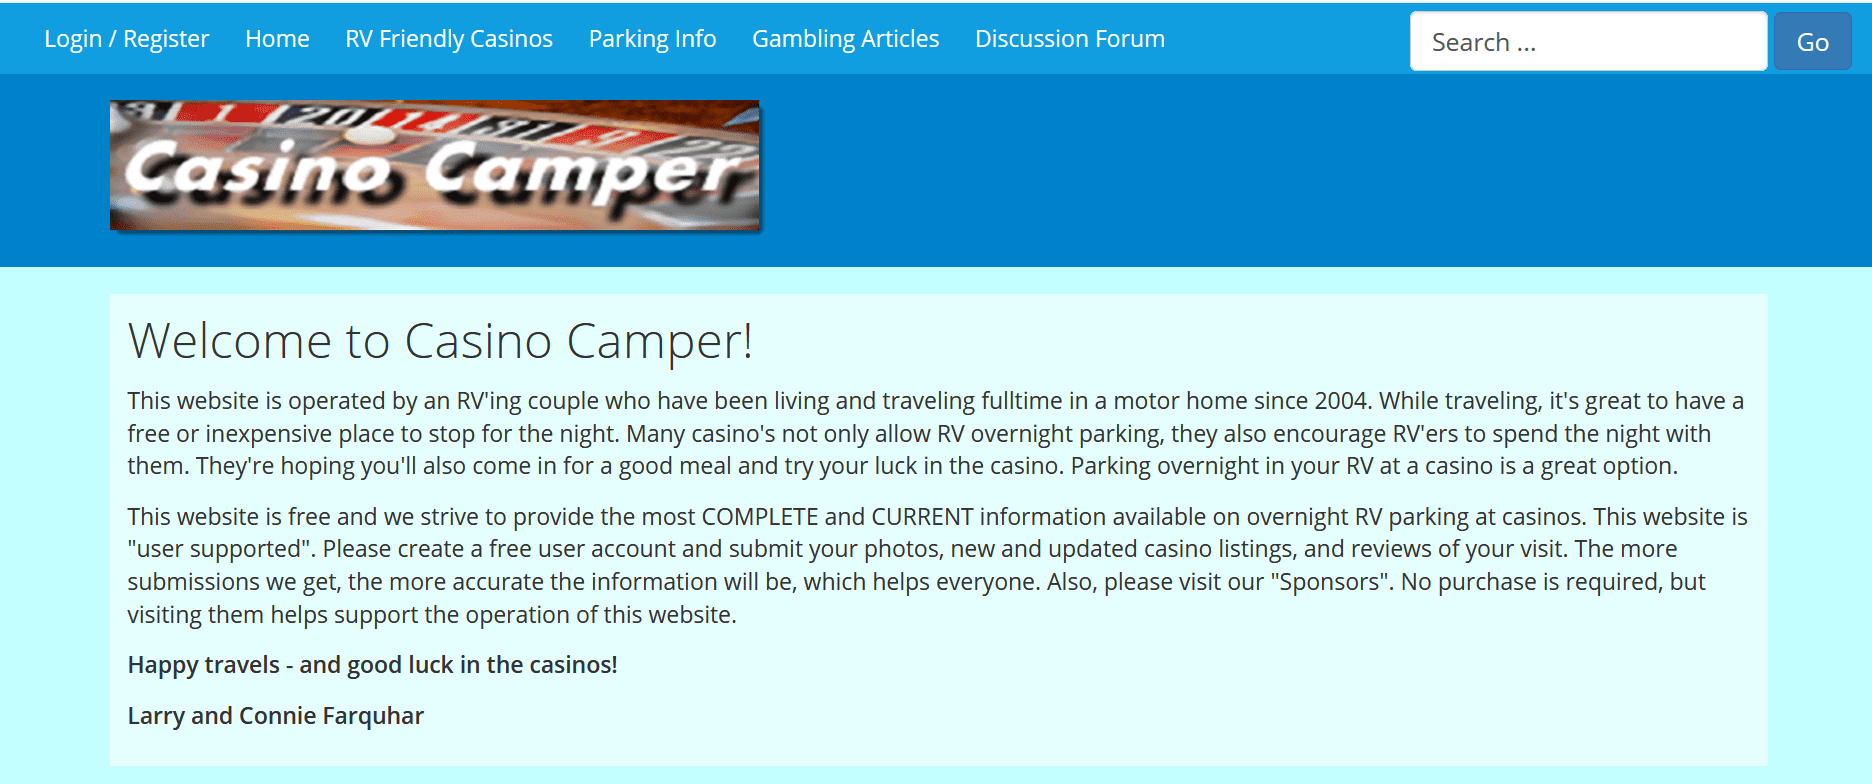 Casino Camper is a great free camping app option